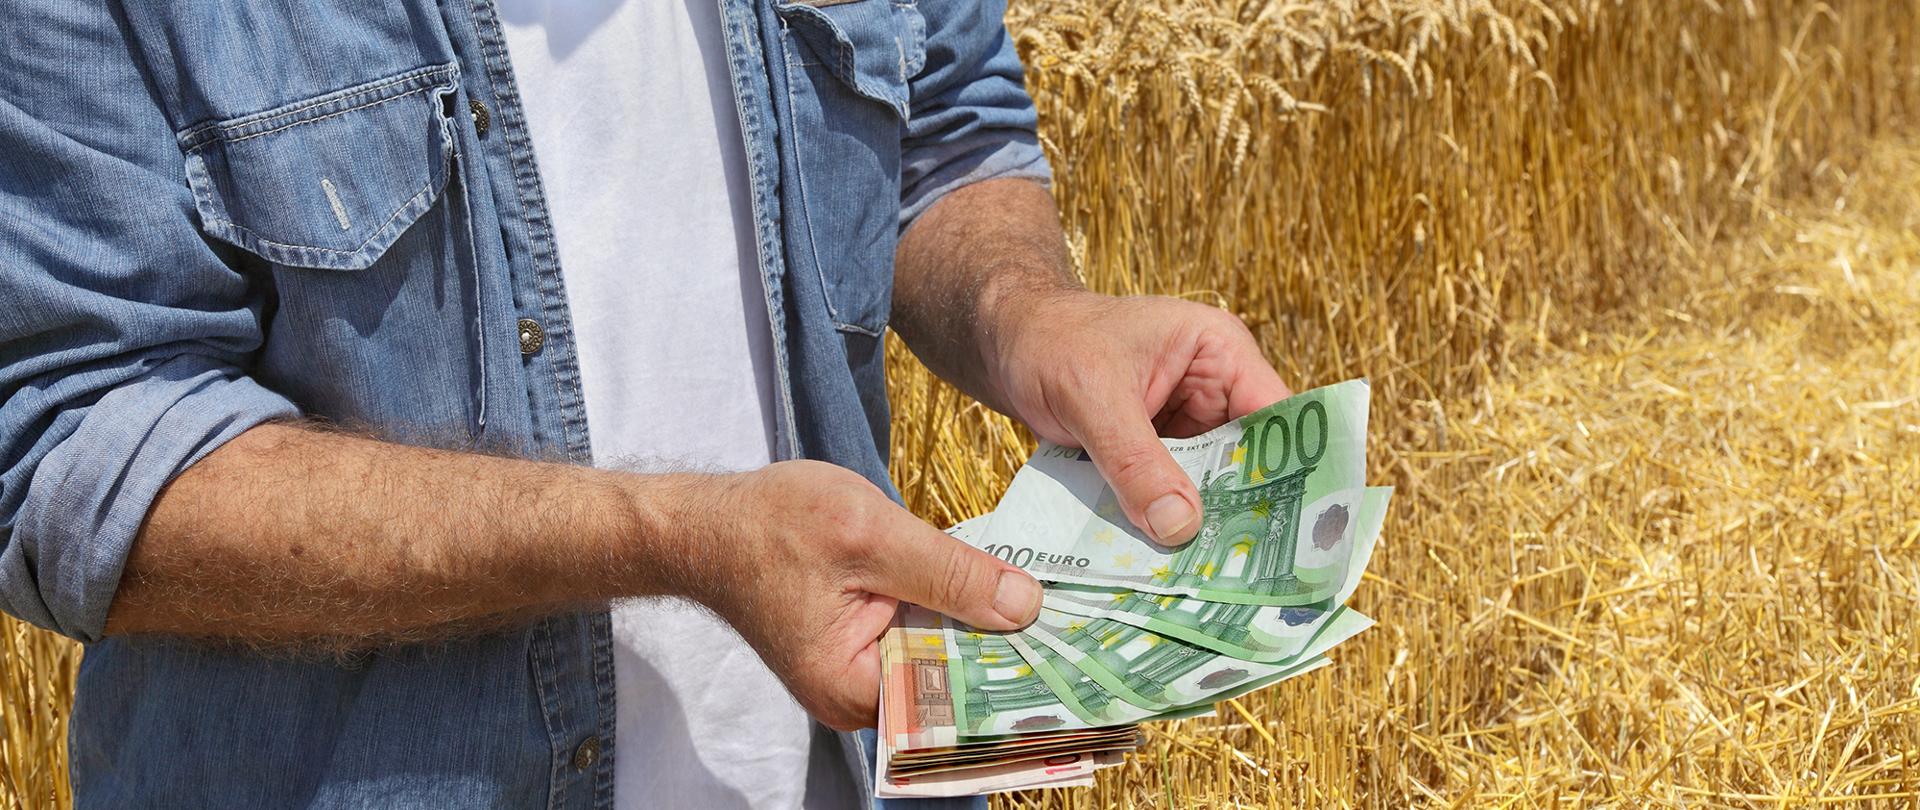 Farmer holding Euro banknote with combine harvester in background